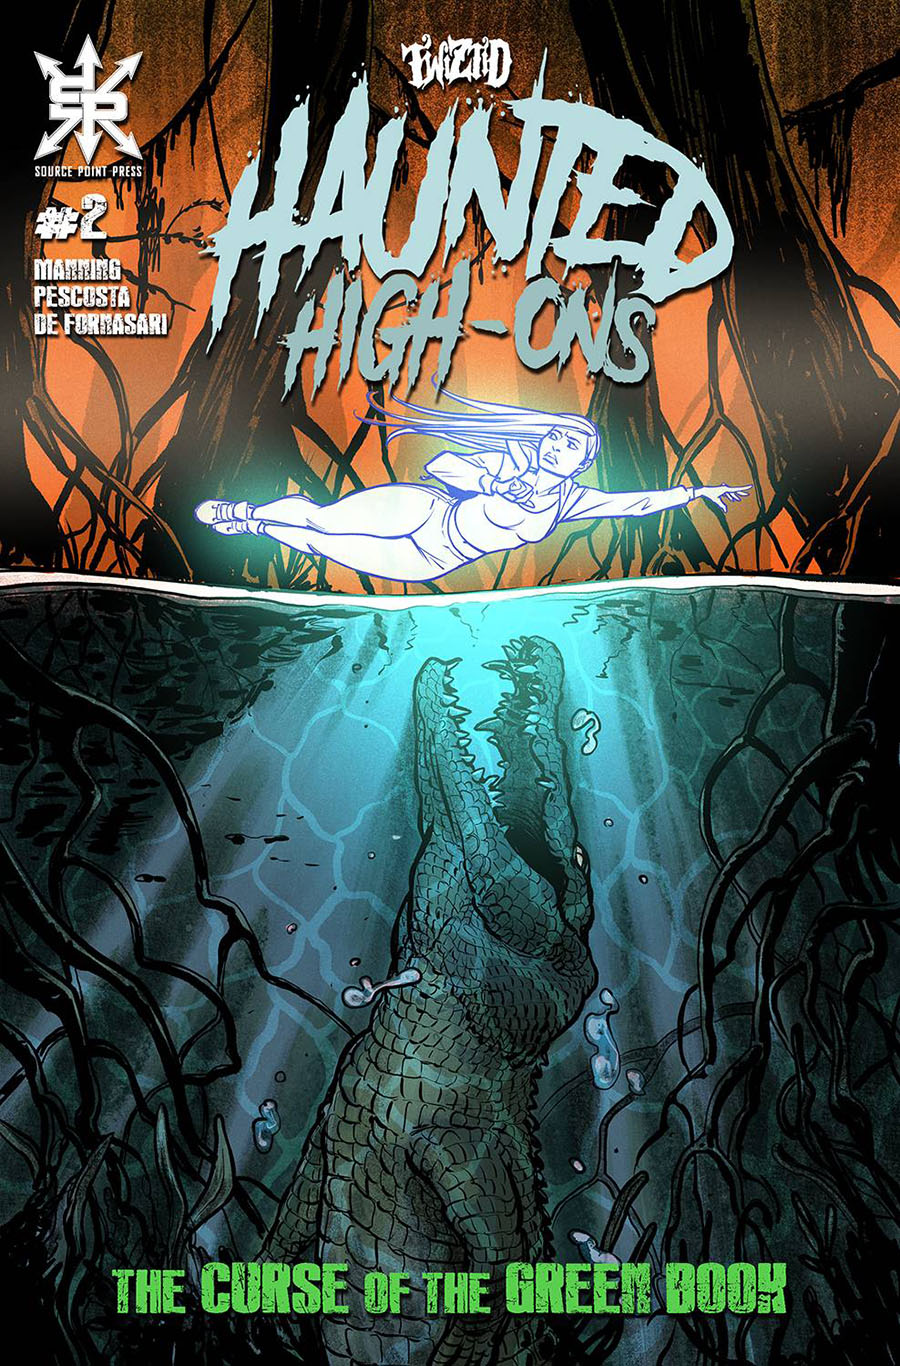 Twiztid Haunted High-Ons The Curse Of The Green Book #2 Cover A Regular Marianna Pescosta Cover